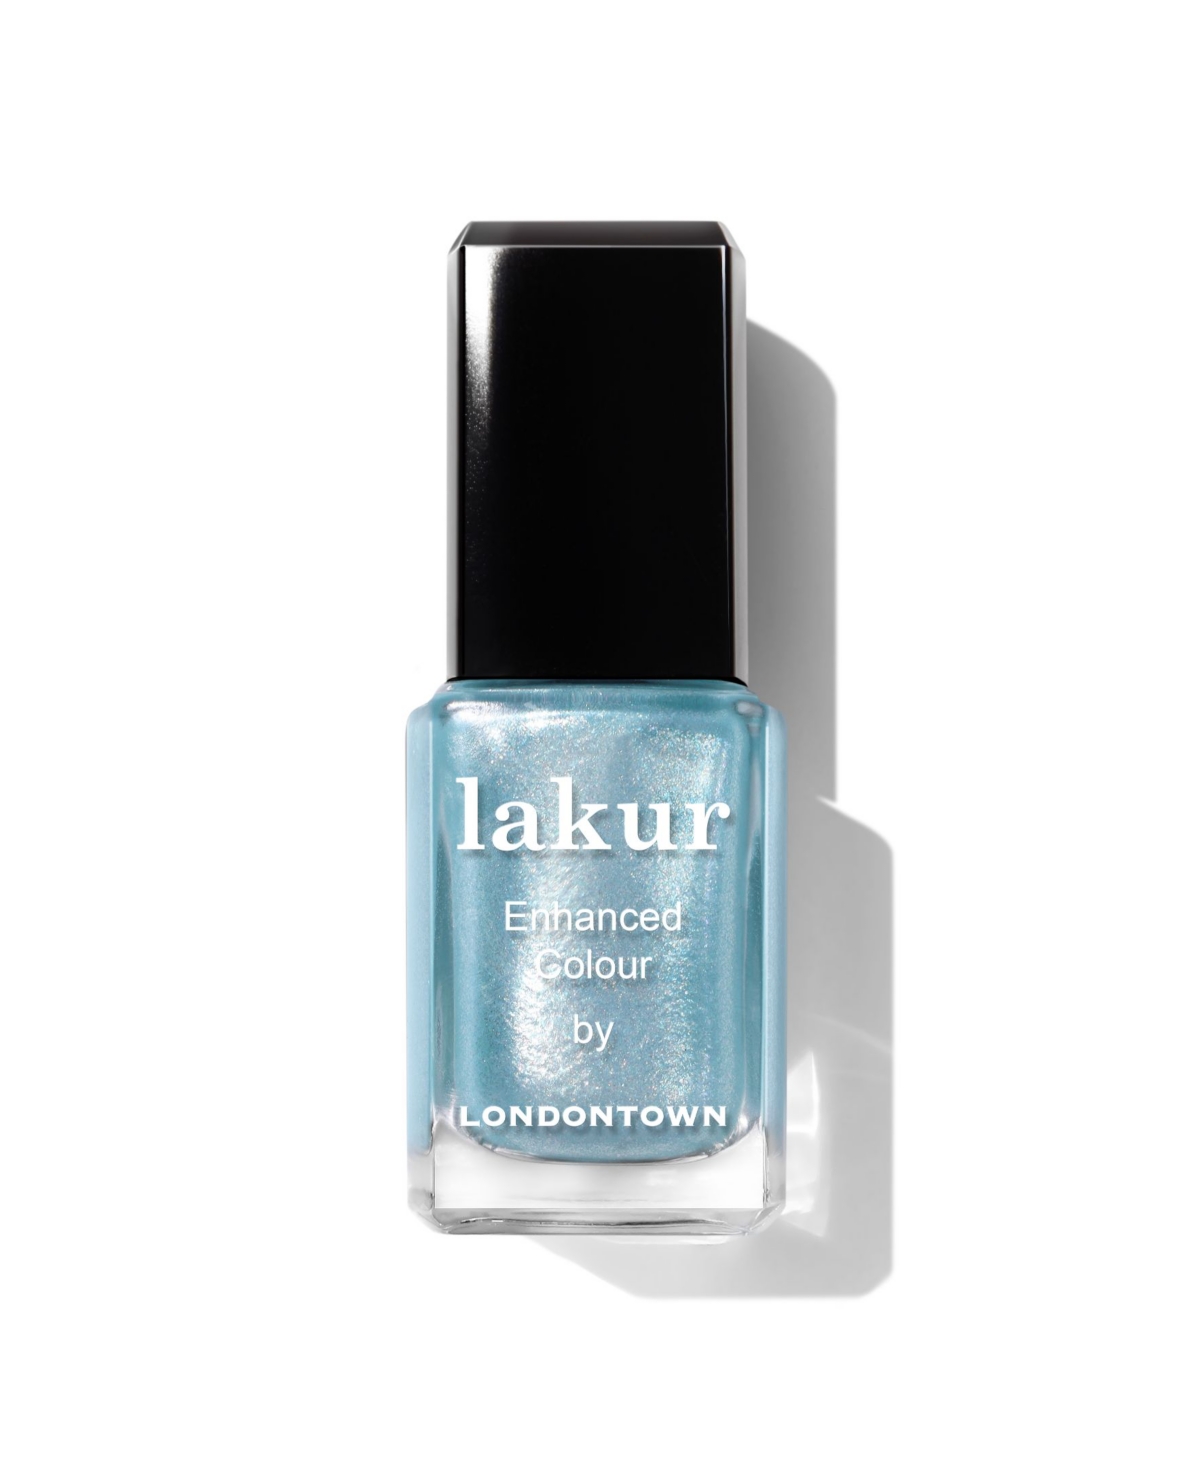 Londontown Lakur Enhanced Color Nail Polish, 0.4 oz In Whipped Blueberry (soft Baby Blue With U